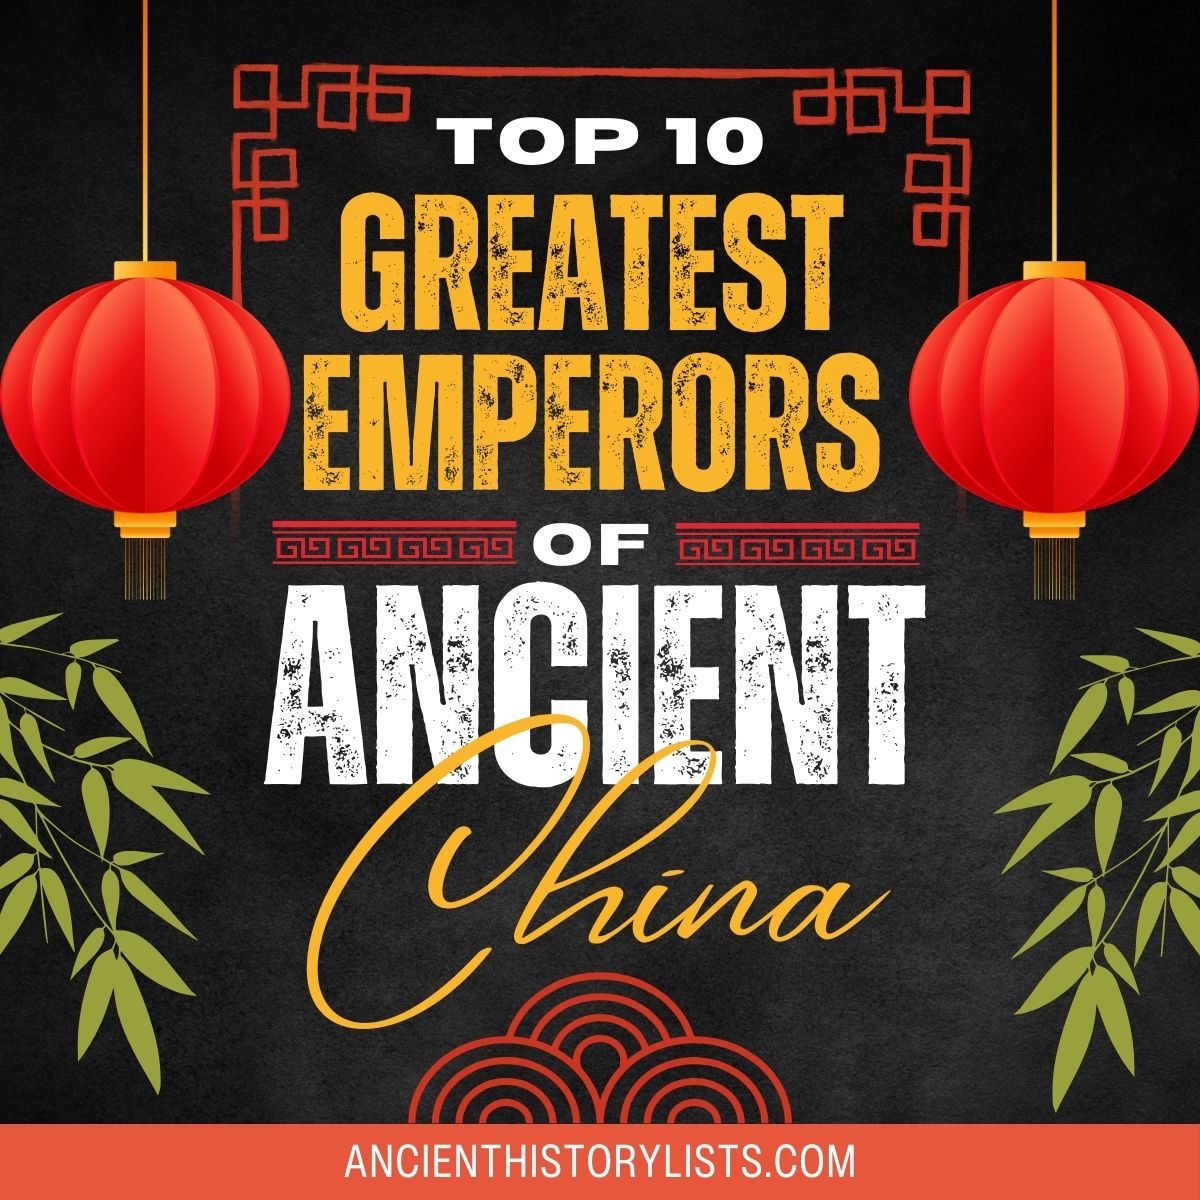 Greatest Emperors of Ancient China